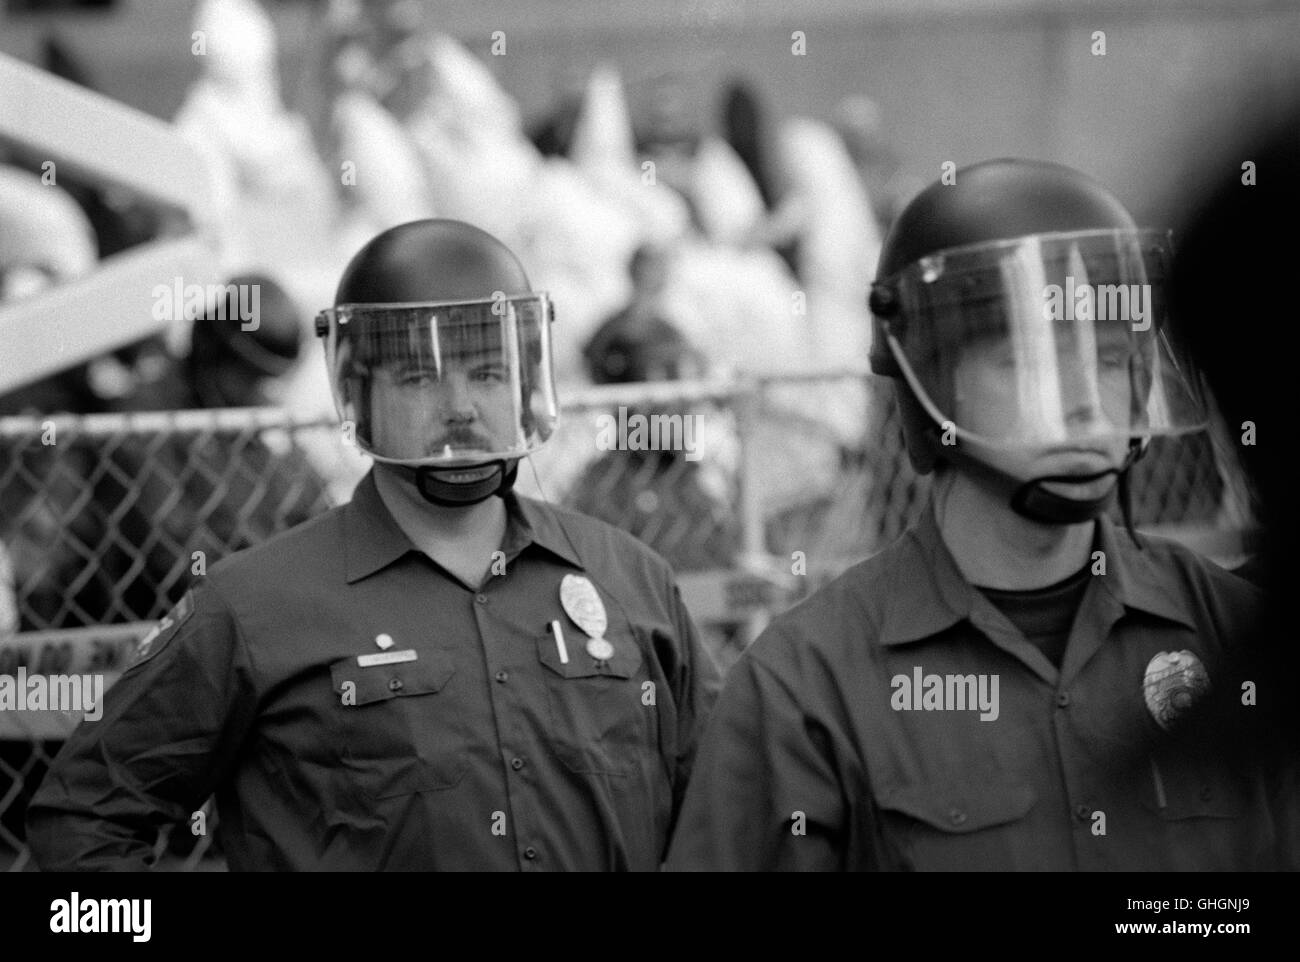 Kkk protest Black and White Stock Photos & Images - Alamy